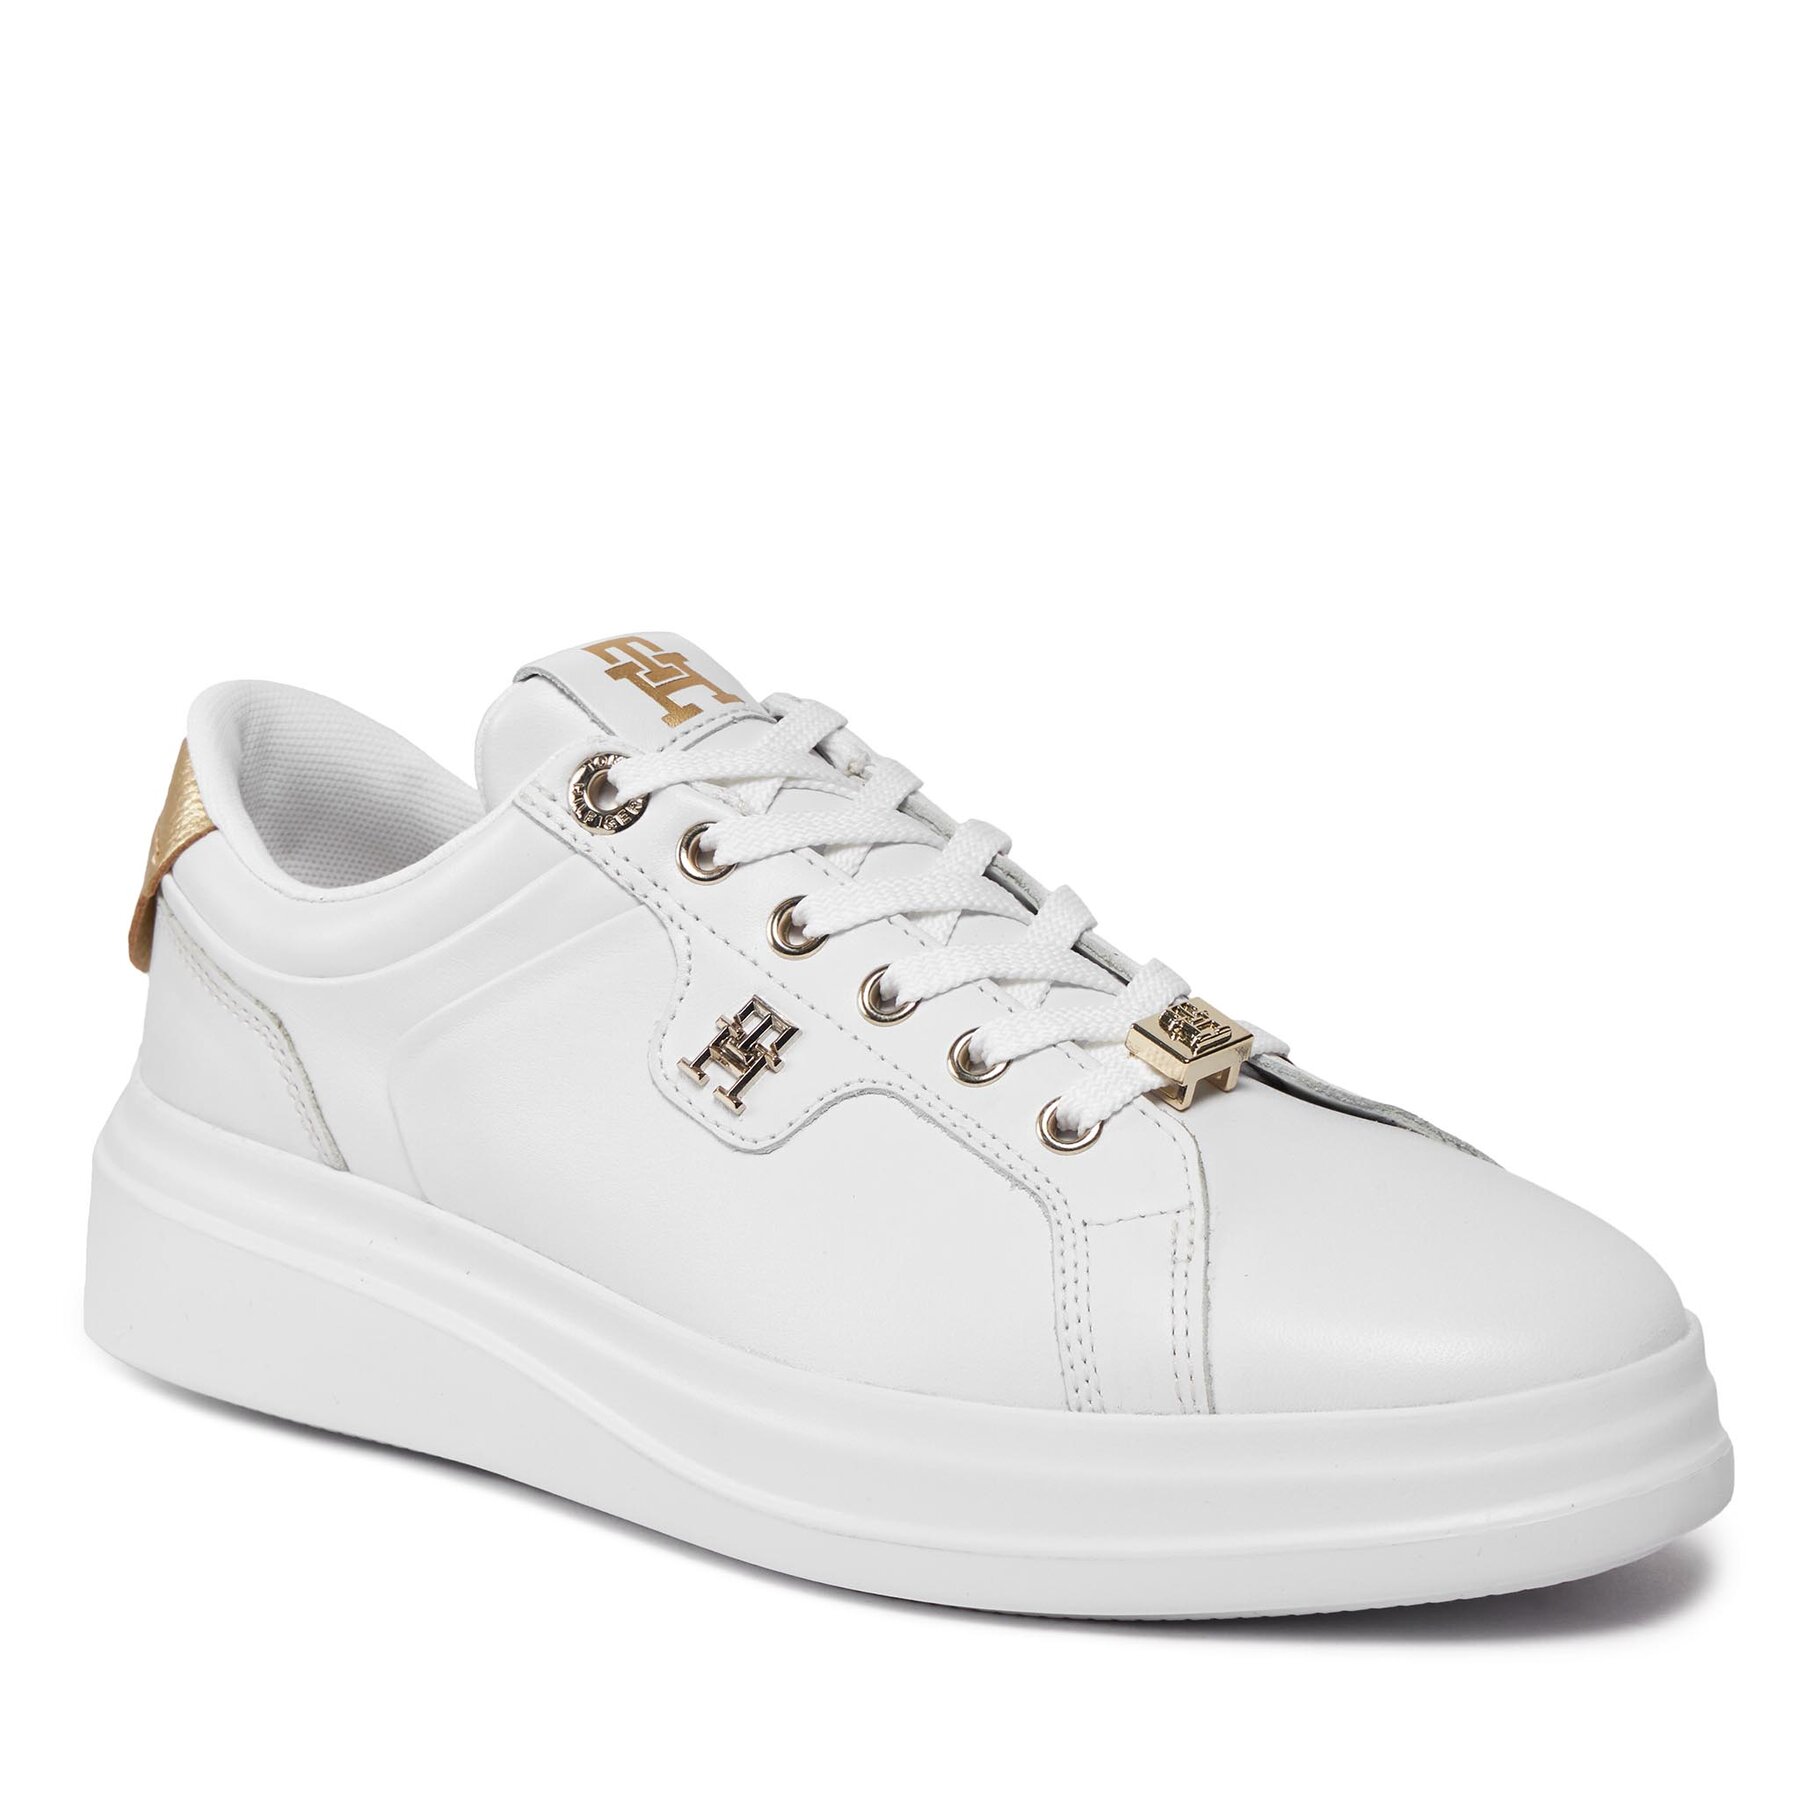 Sneakers Tommy Hilfiger Pointy Court Sneaker Hardware FW0FW07780 White/Gold 0K7